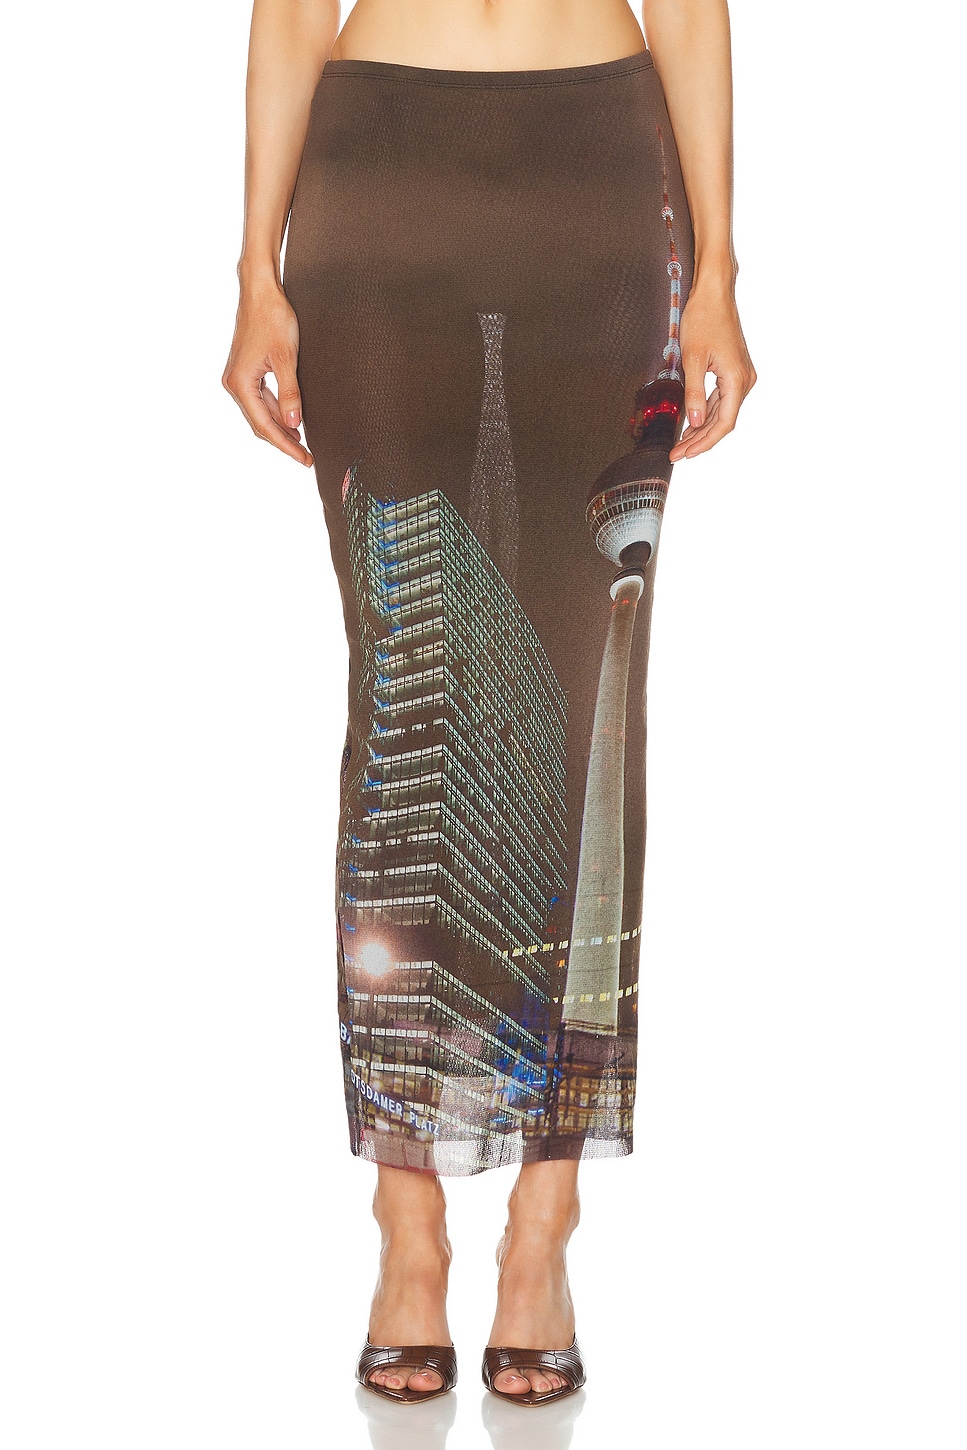 Image 1 of Jean Paul Gaultier X Shayne Oliver Mesh City Long Skirt in Brown, Green, Blue, & Red